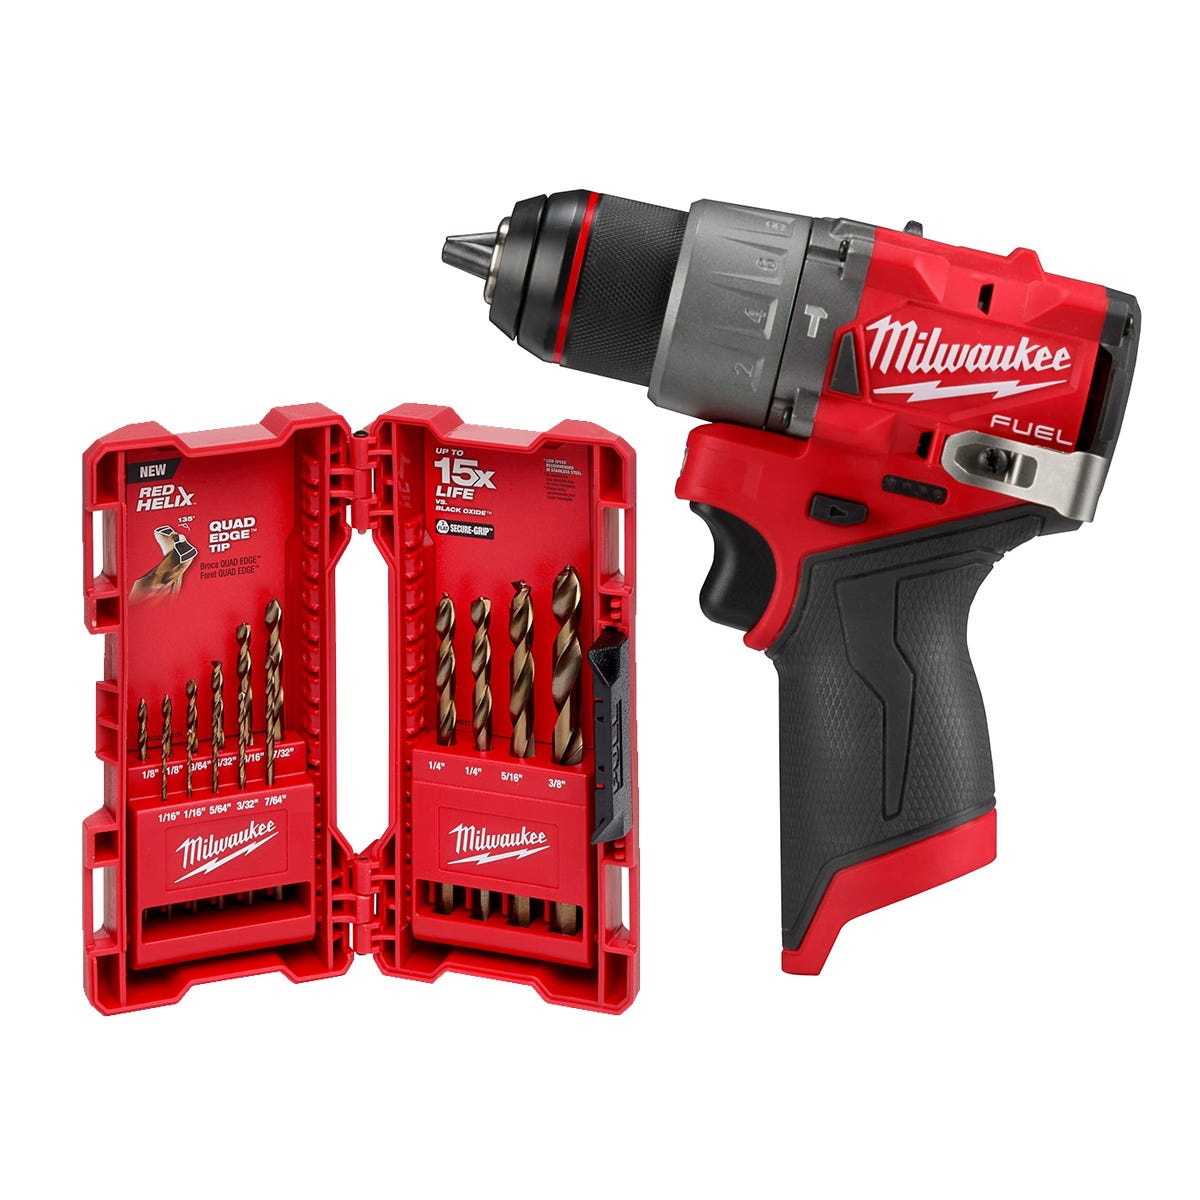 Milwaukee 3404-20 M12 FUEL Gen4 1/2-in. Hammer Drill/Driver, Tool Only with  15-Piece Cobalt Red Helix Kit